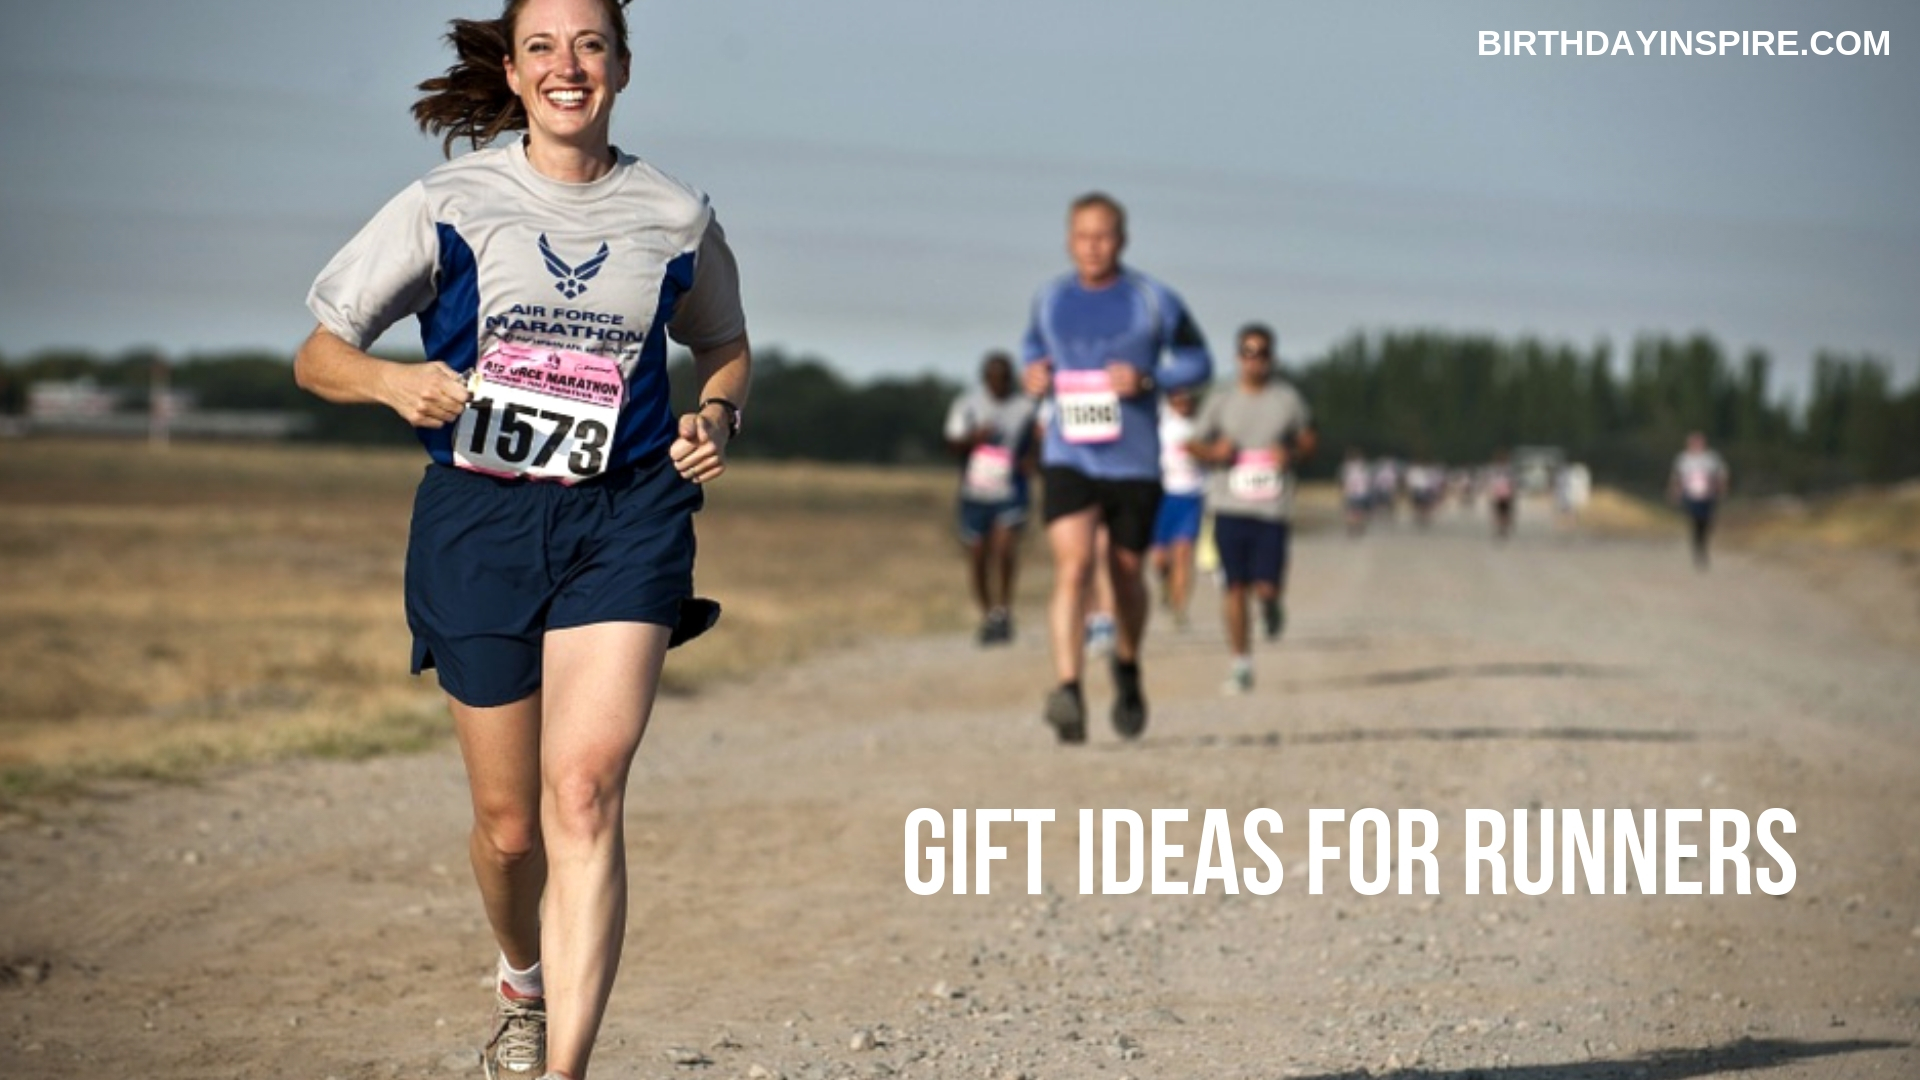 GIFT IDEAS FOR RUNNERS